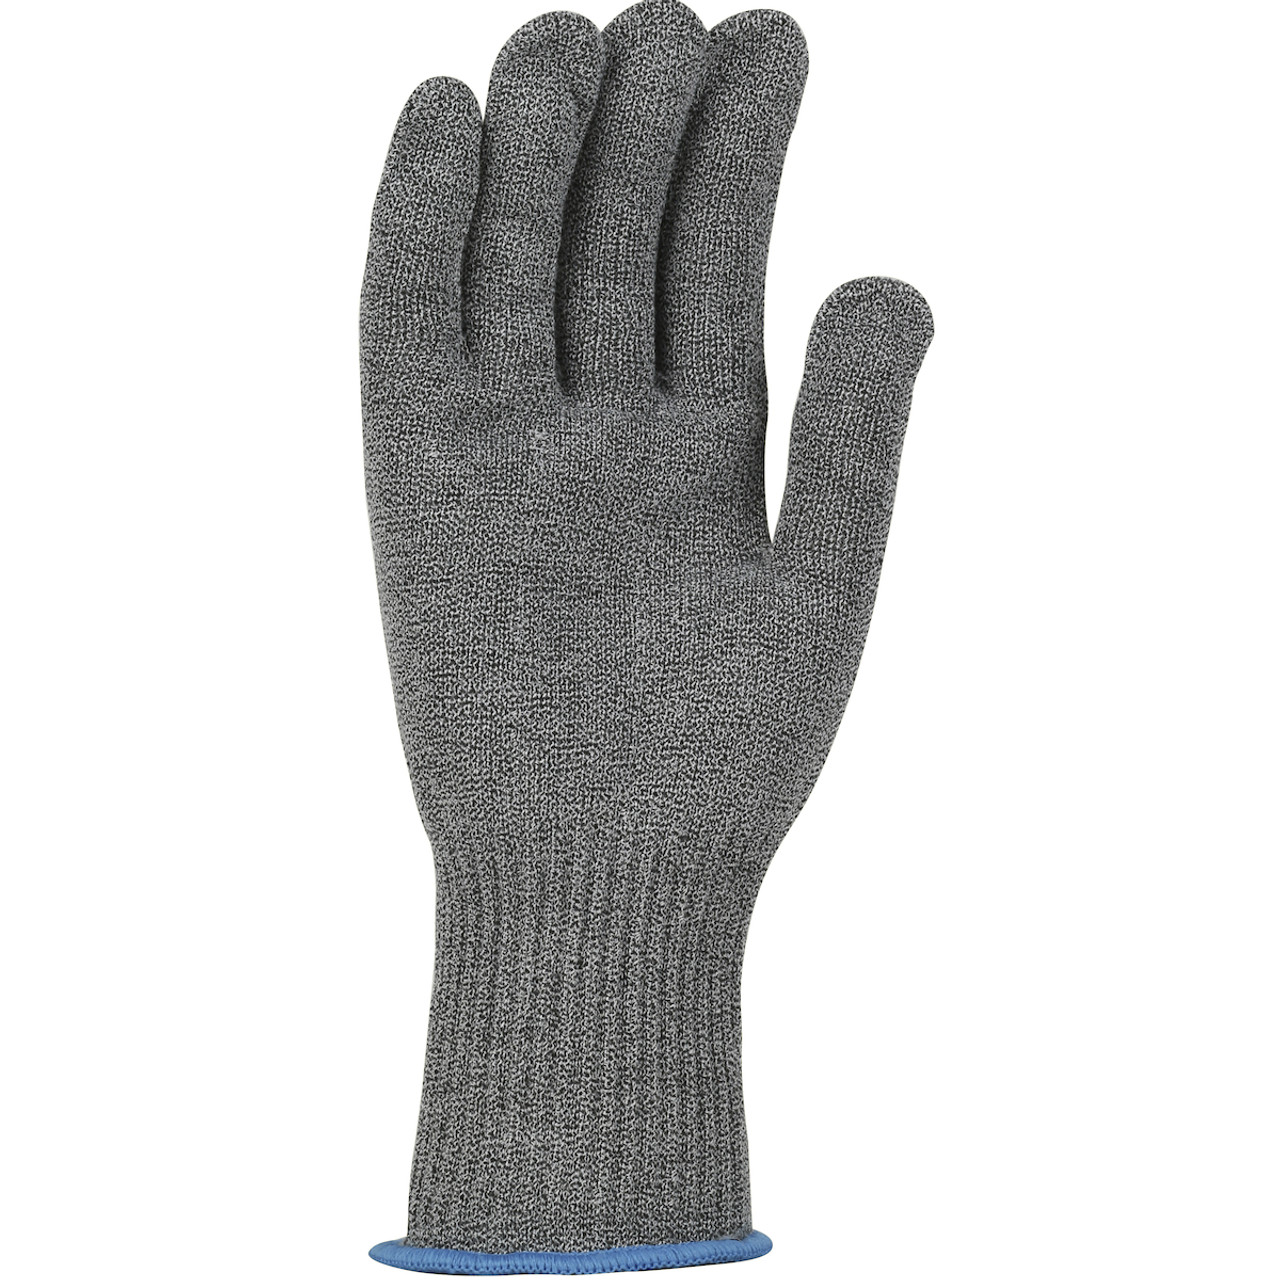 Wpp-Glove, Claw Cover 10G - Size S, Gray, Cut Resistant Gloves, 1 Unit  10-1212 - First Industrial Supplies